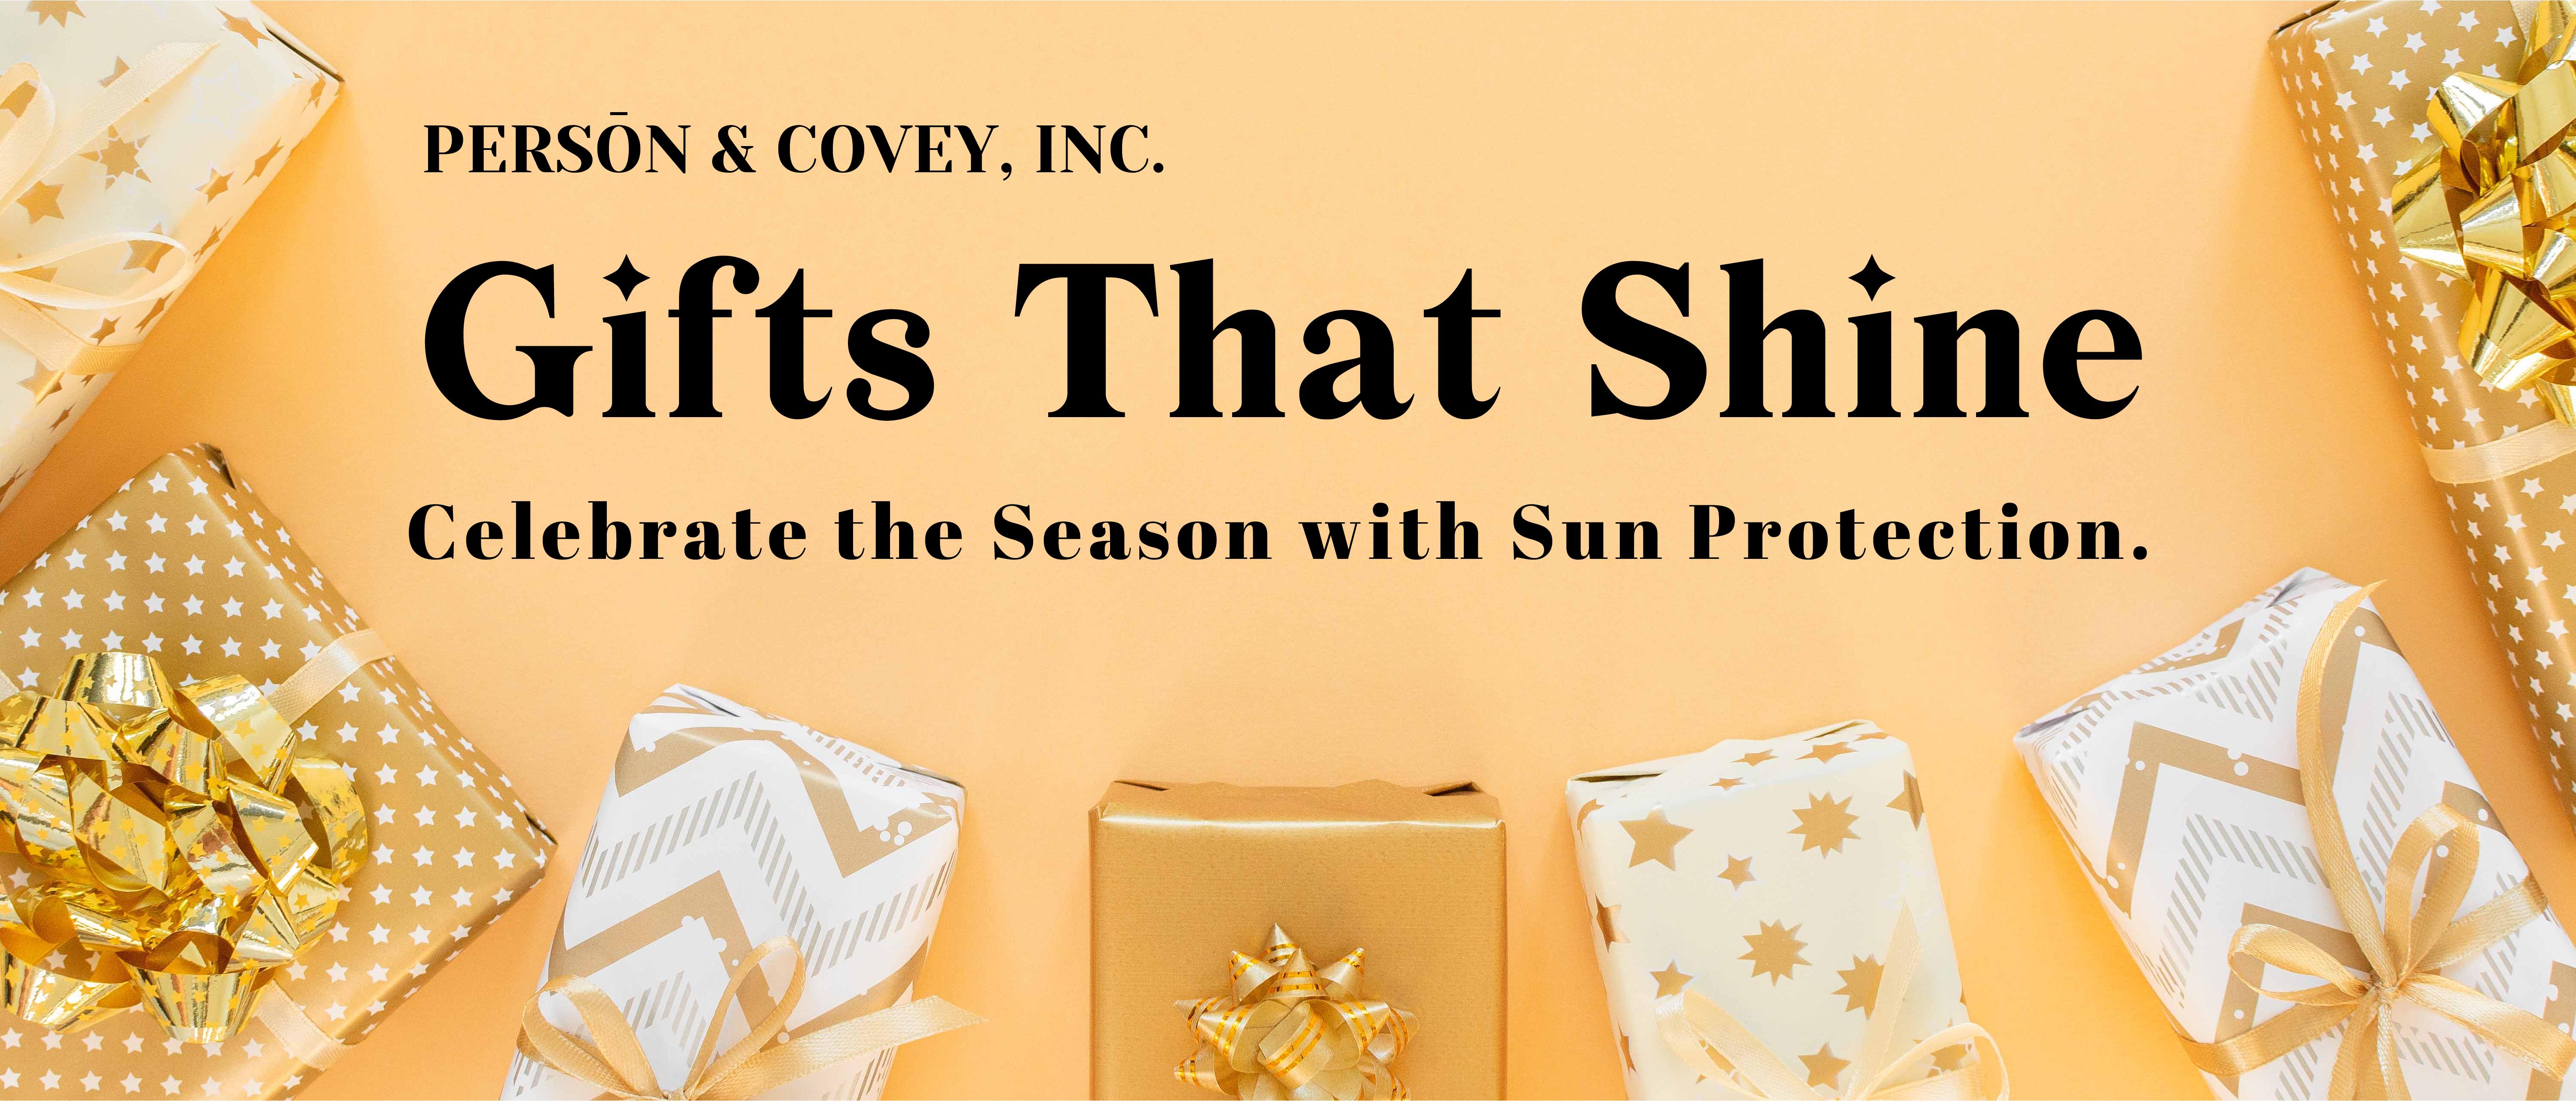 Gifts that Shine- celebrate the season with comprehensive sun protection